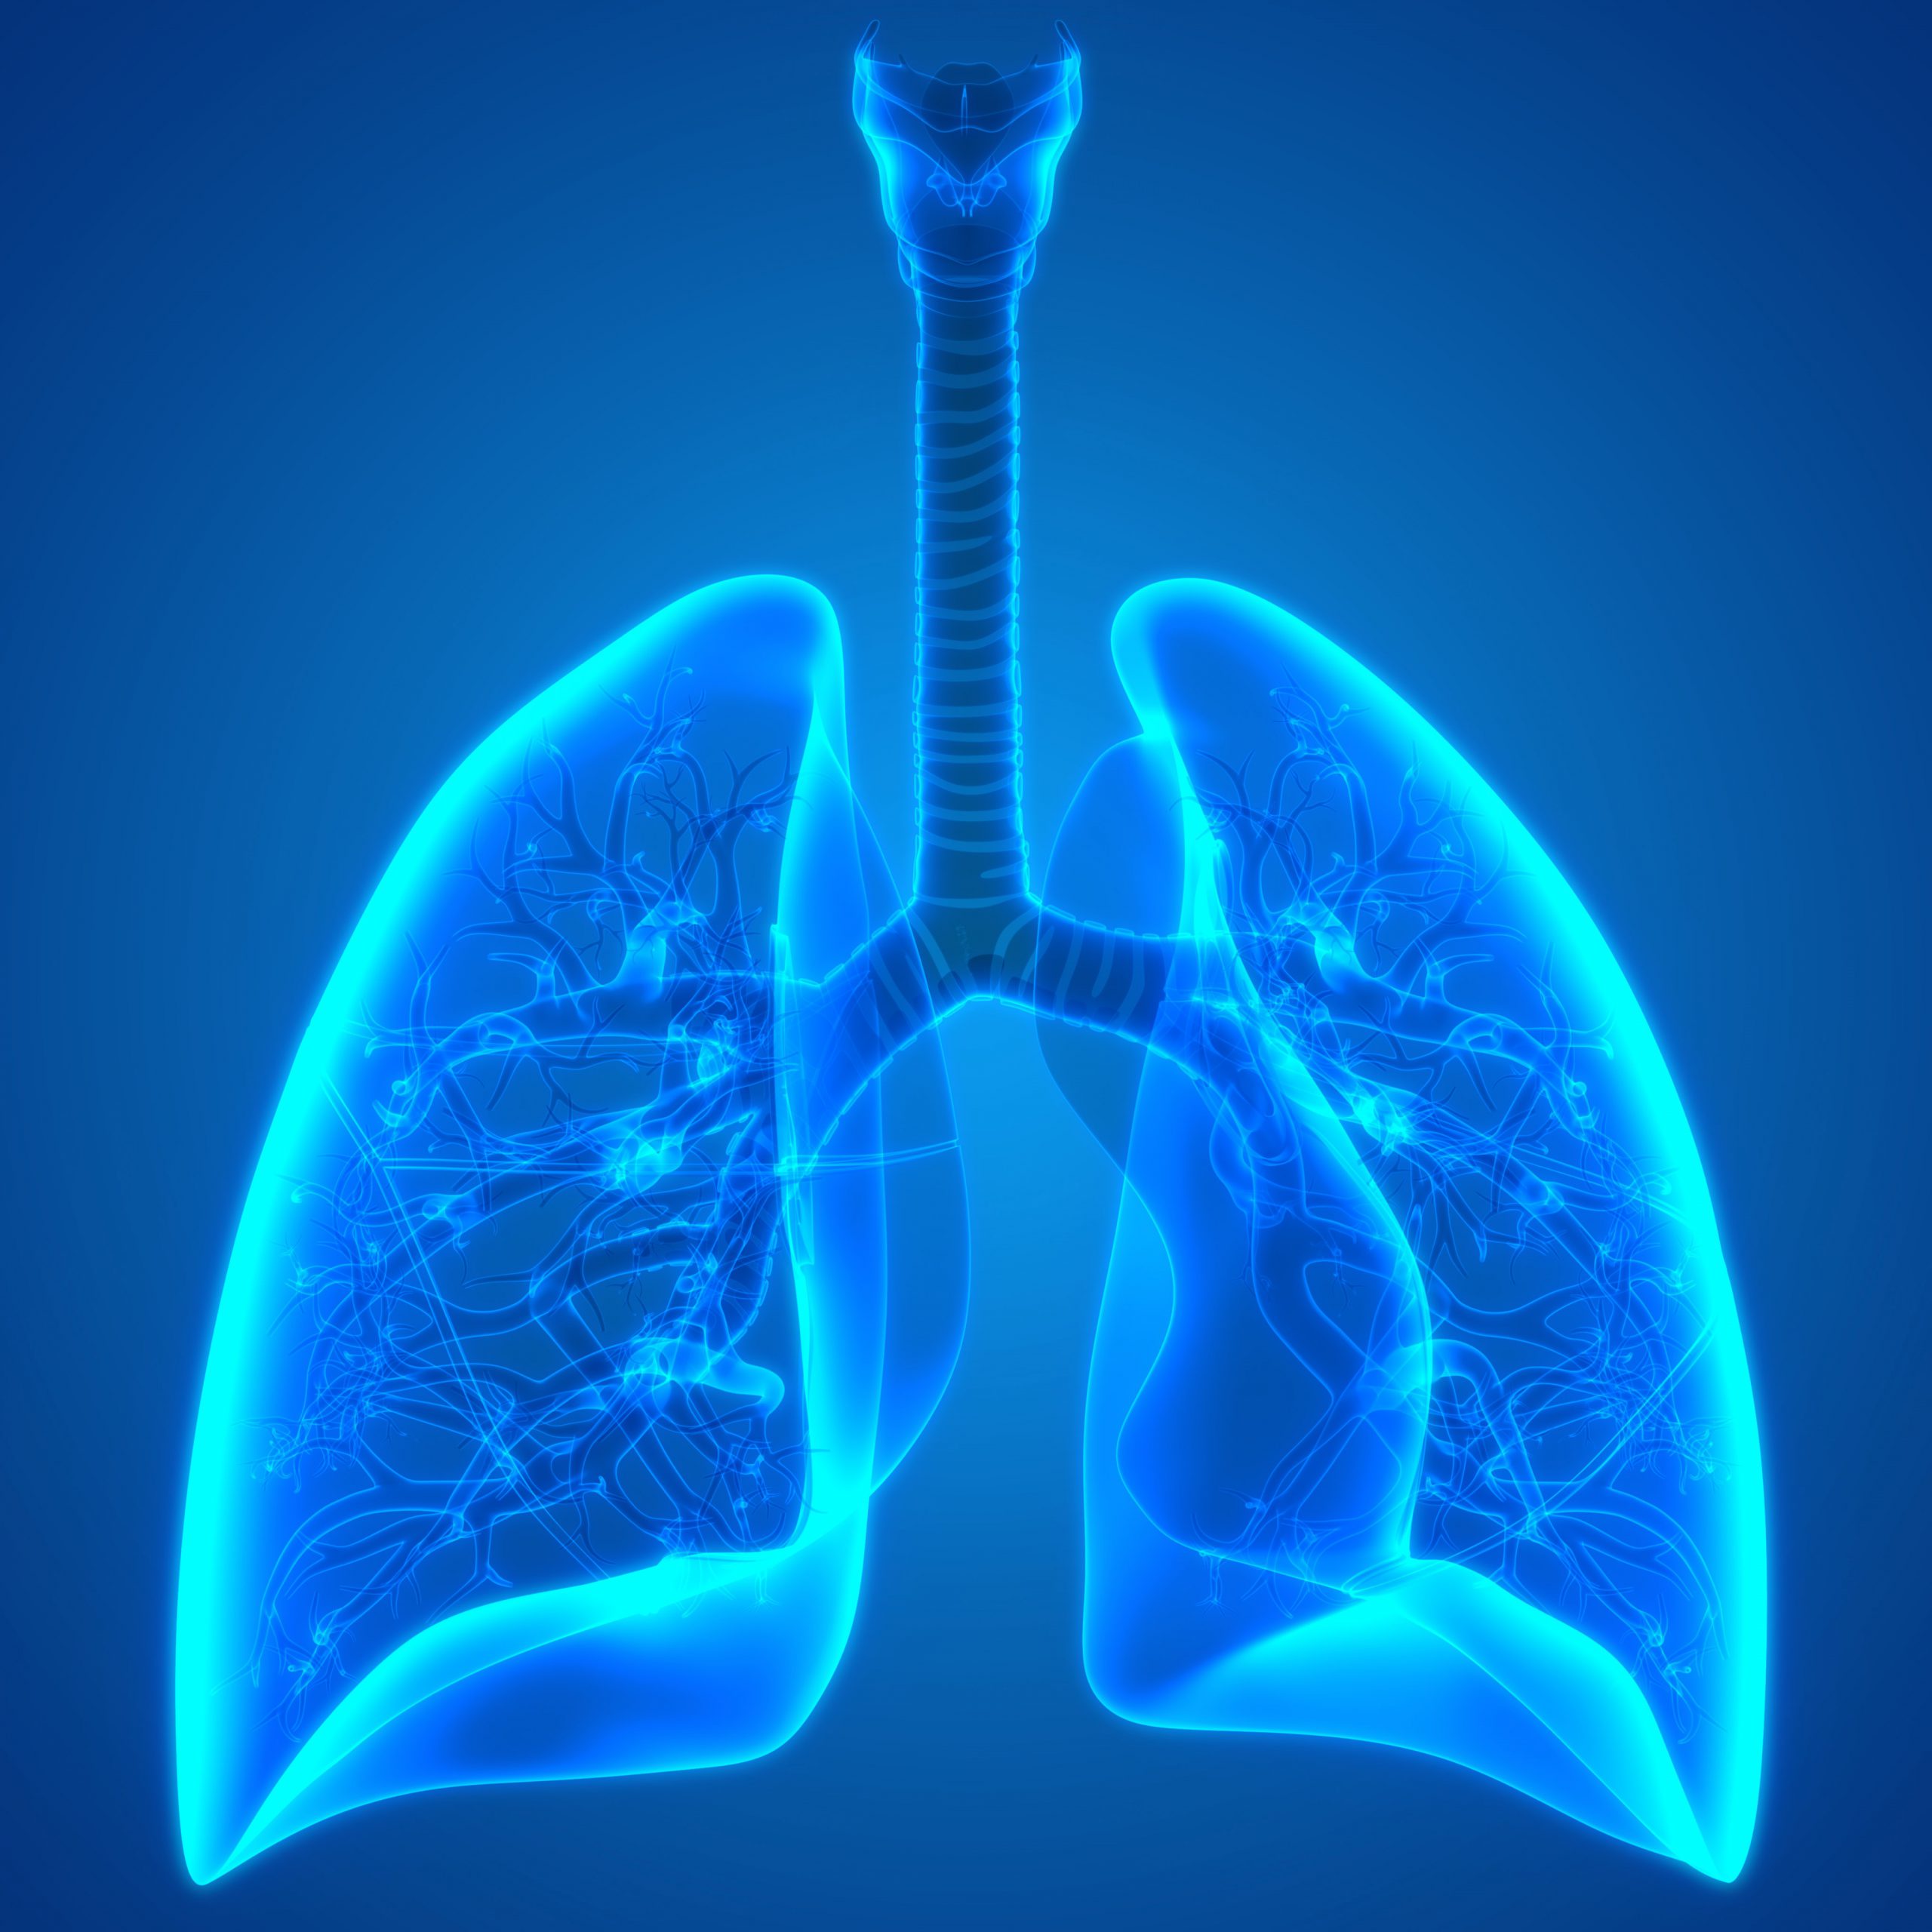 A computer-generated illustration of two human lungs in bright blue.